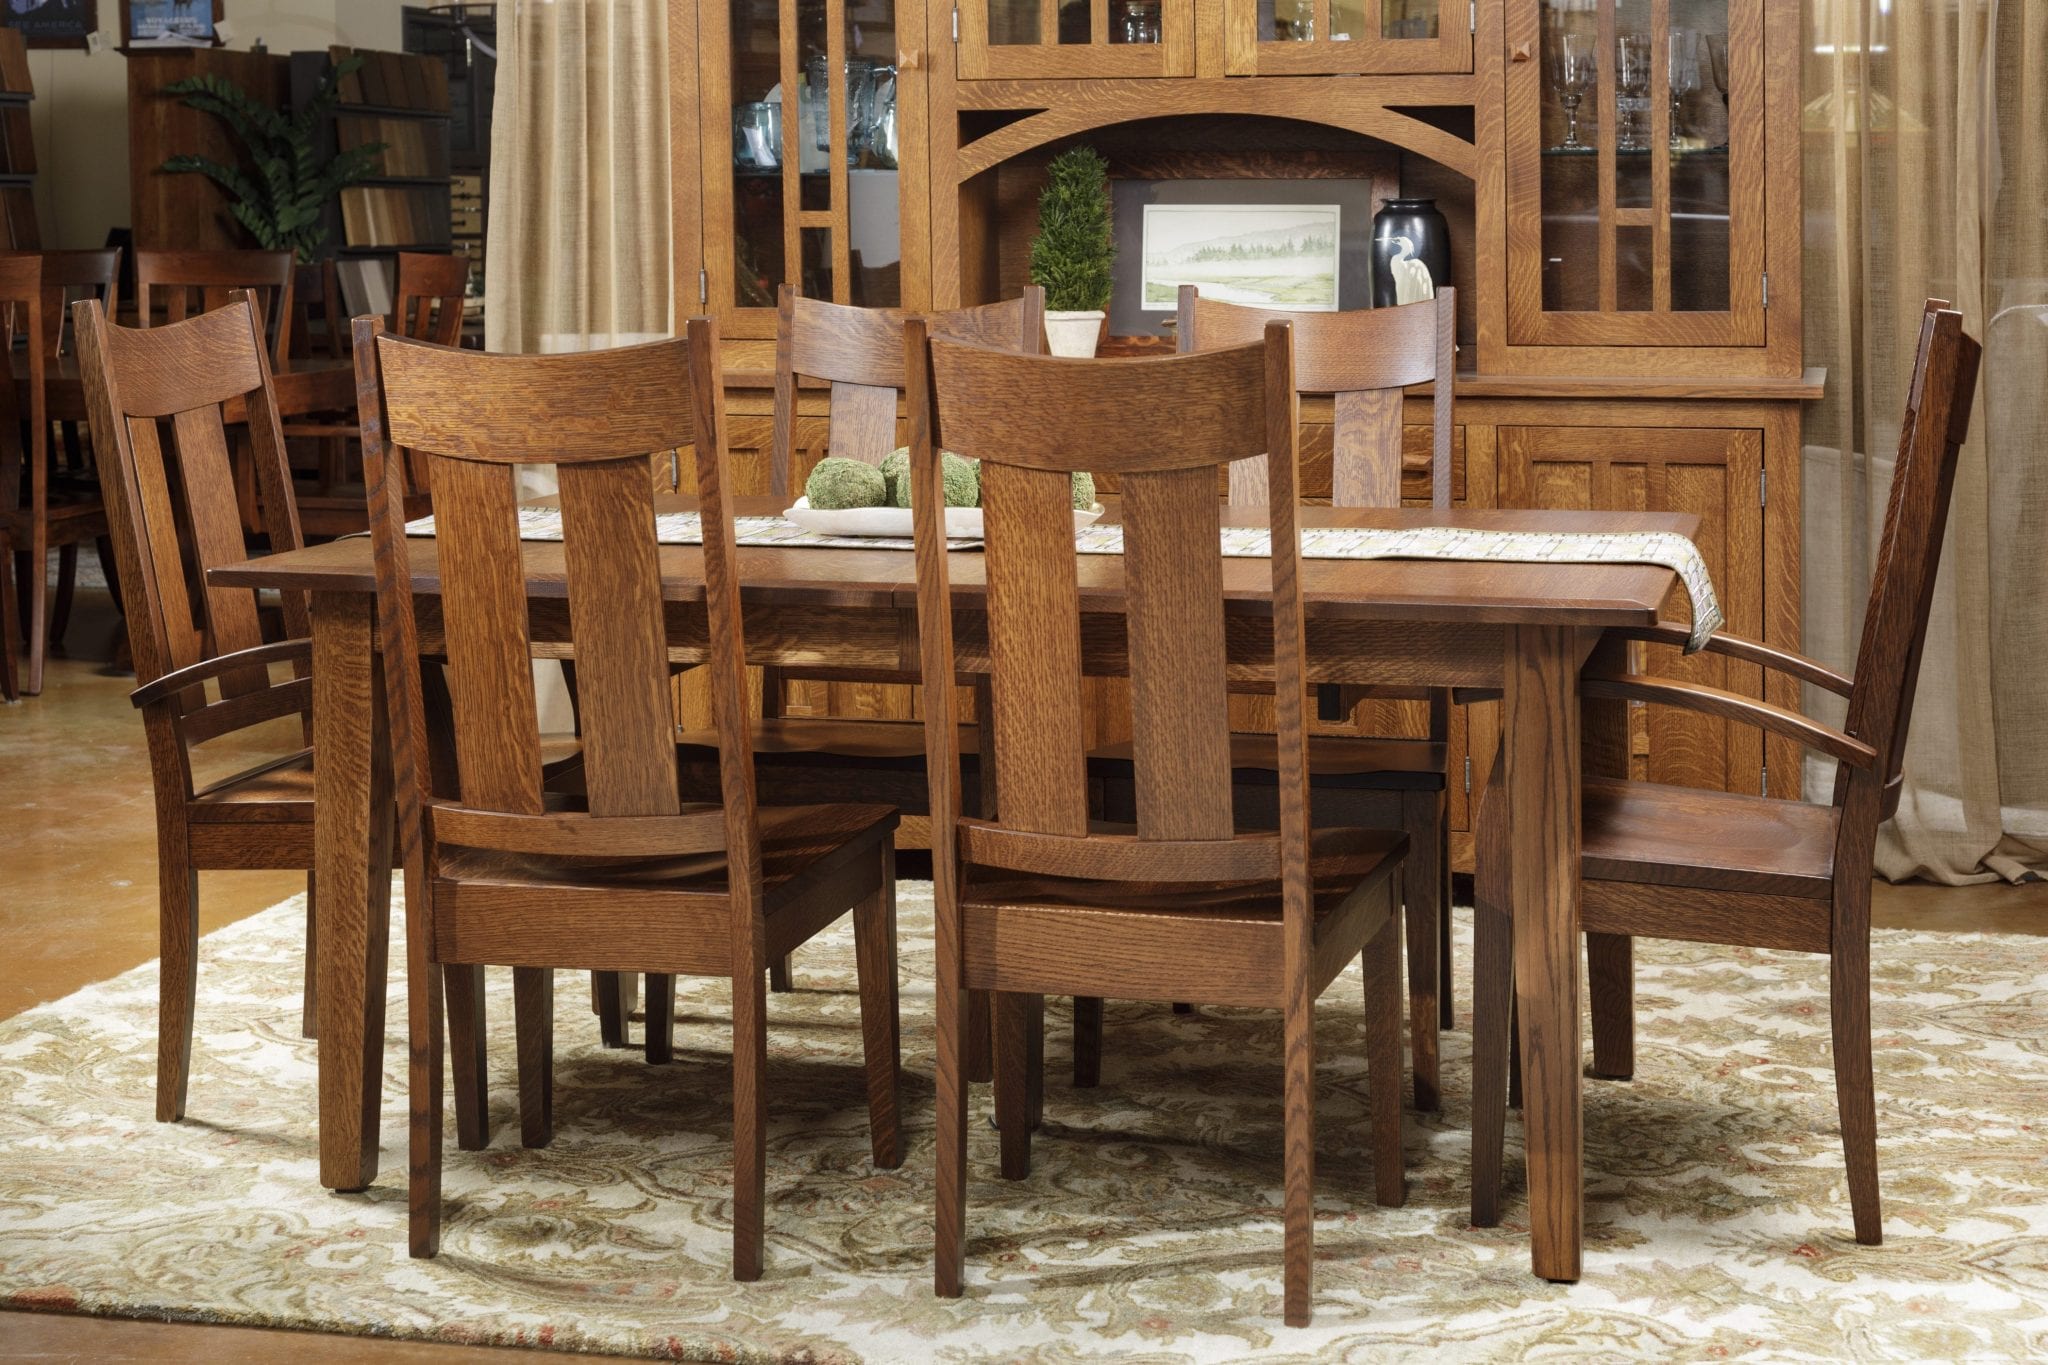 Mission Furniture The Amish Craftsman, Mission Style Oak Dining Room Chairs